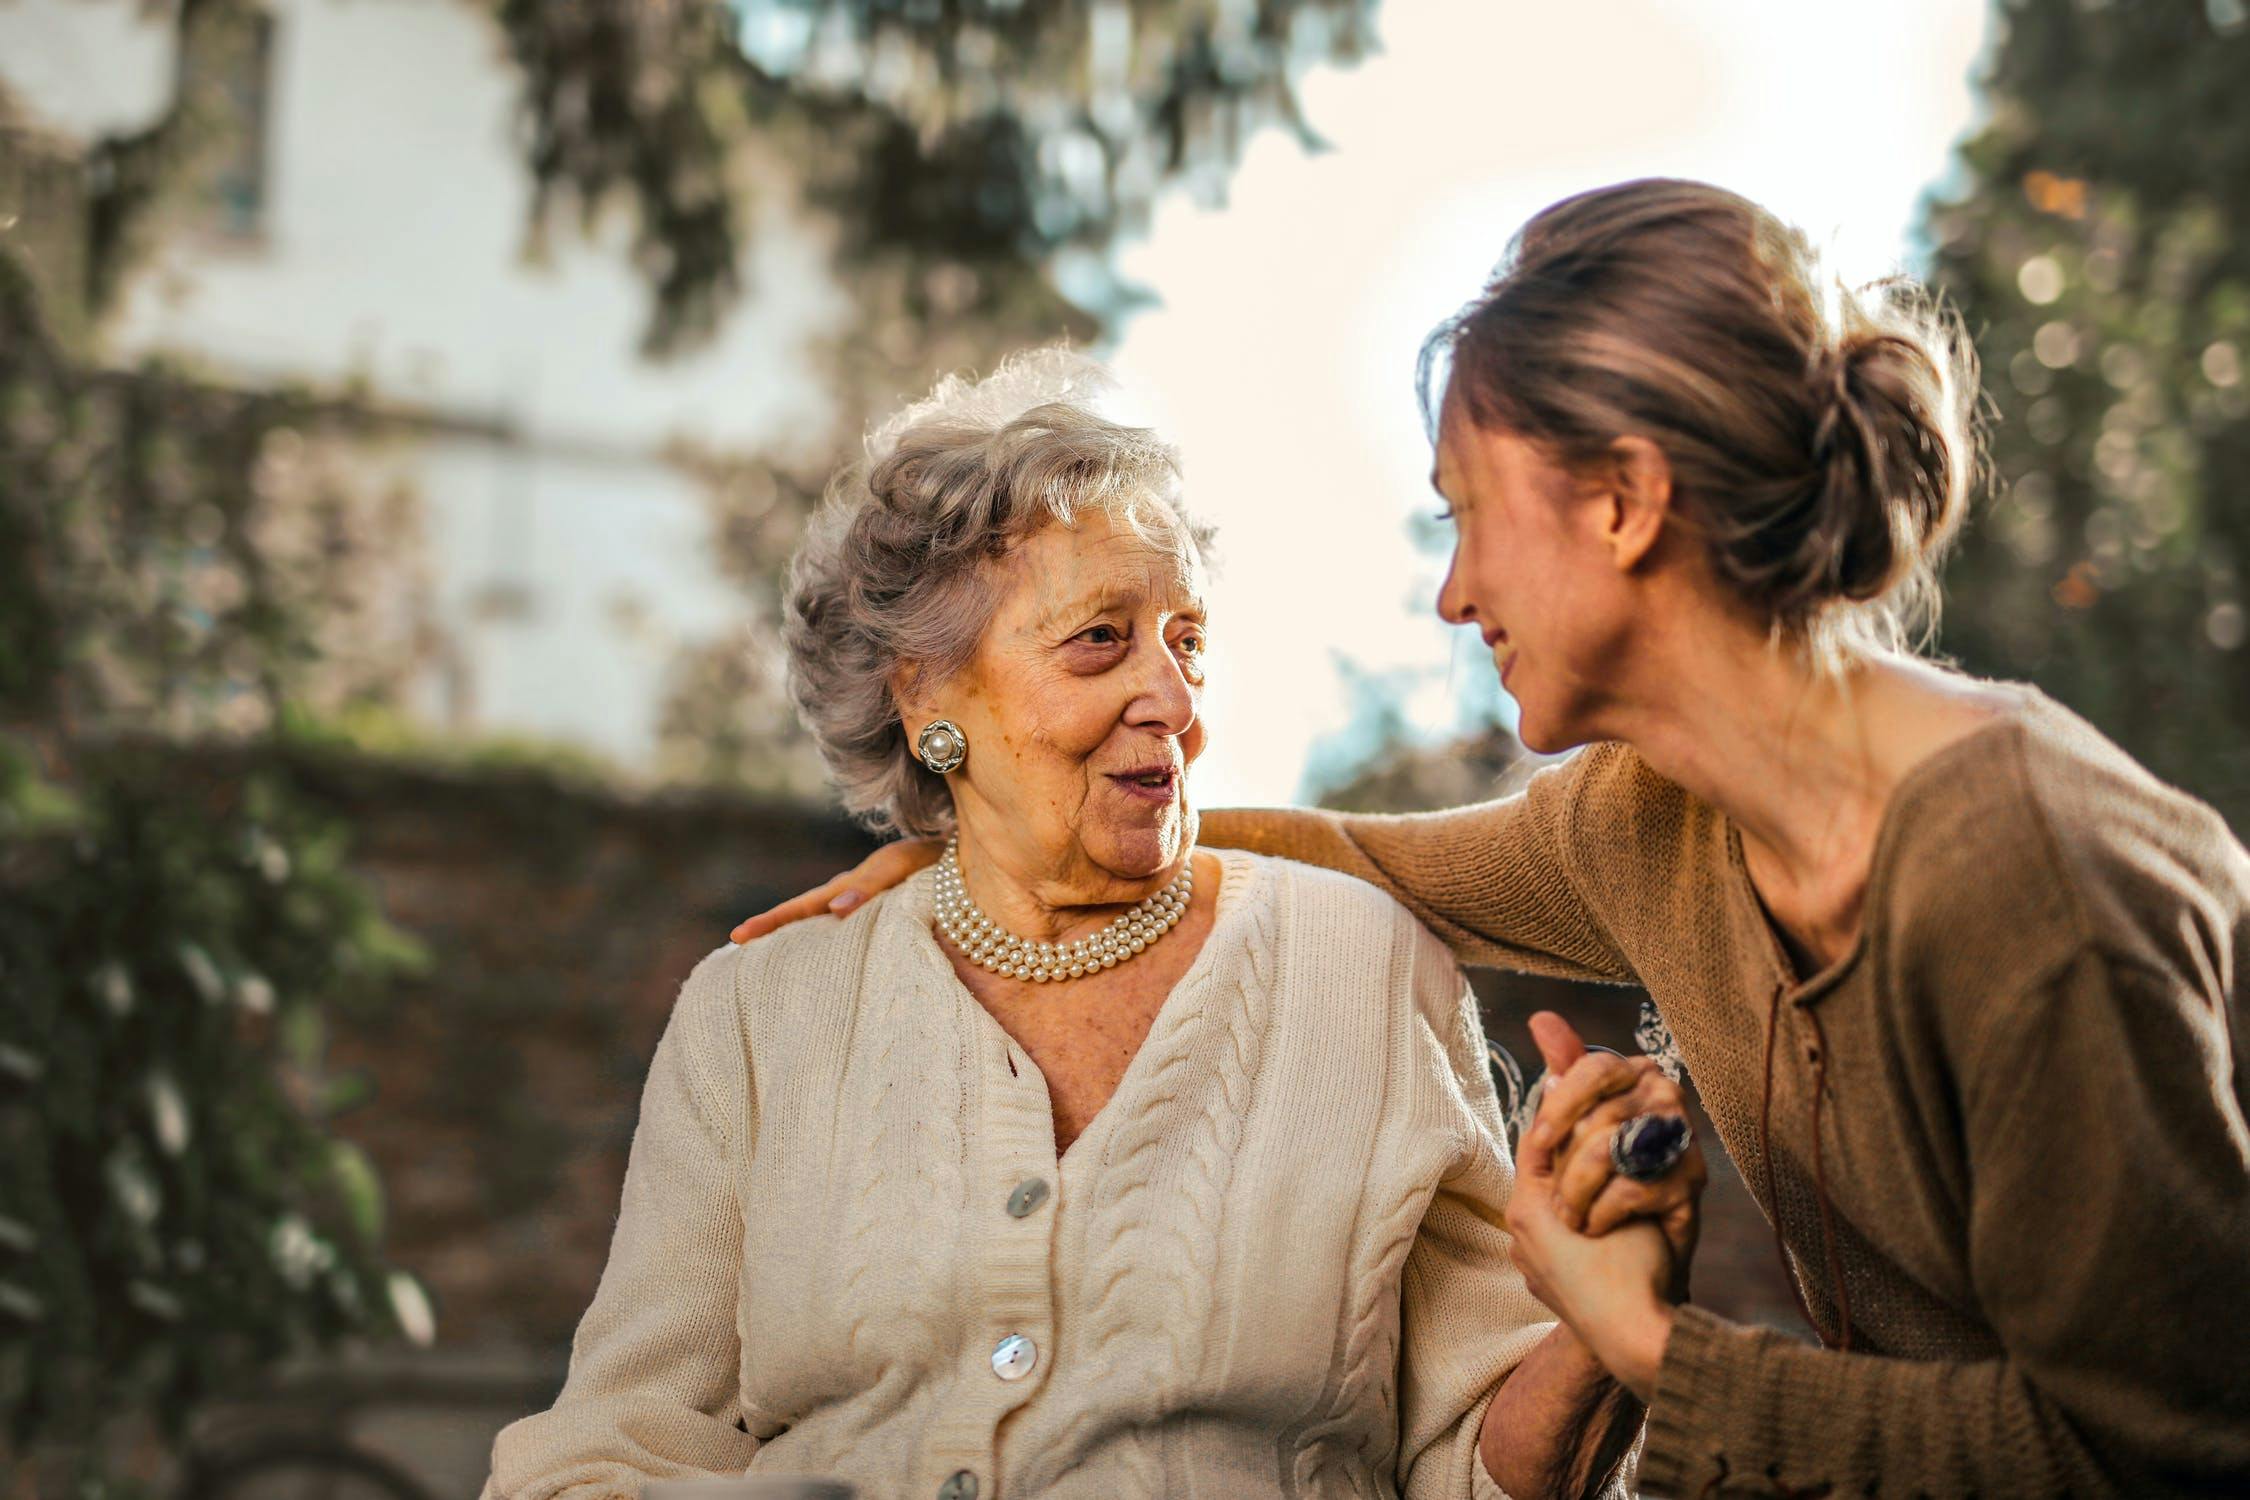 Elderly mother looking at adult daughter while smiling and holding hands.